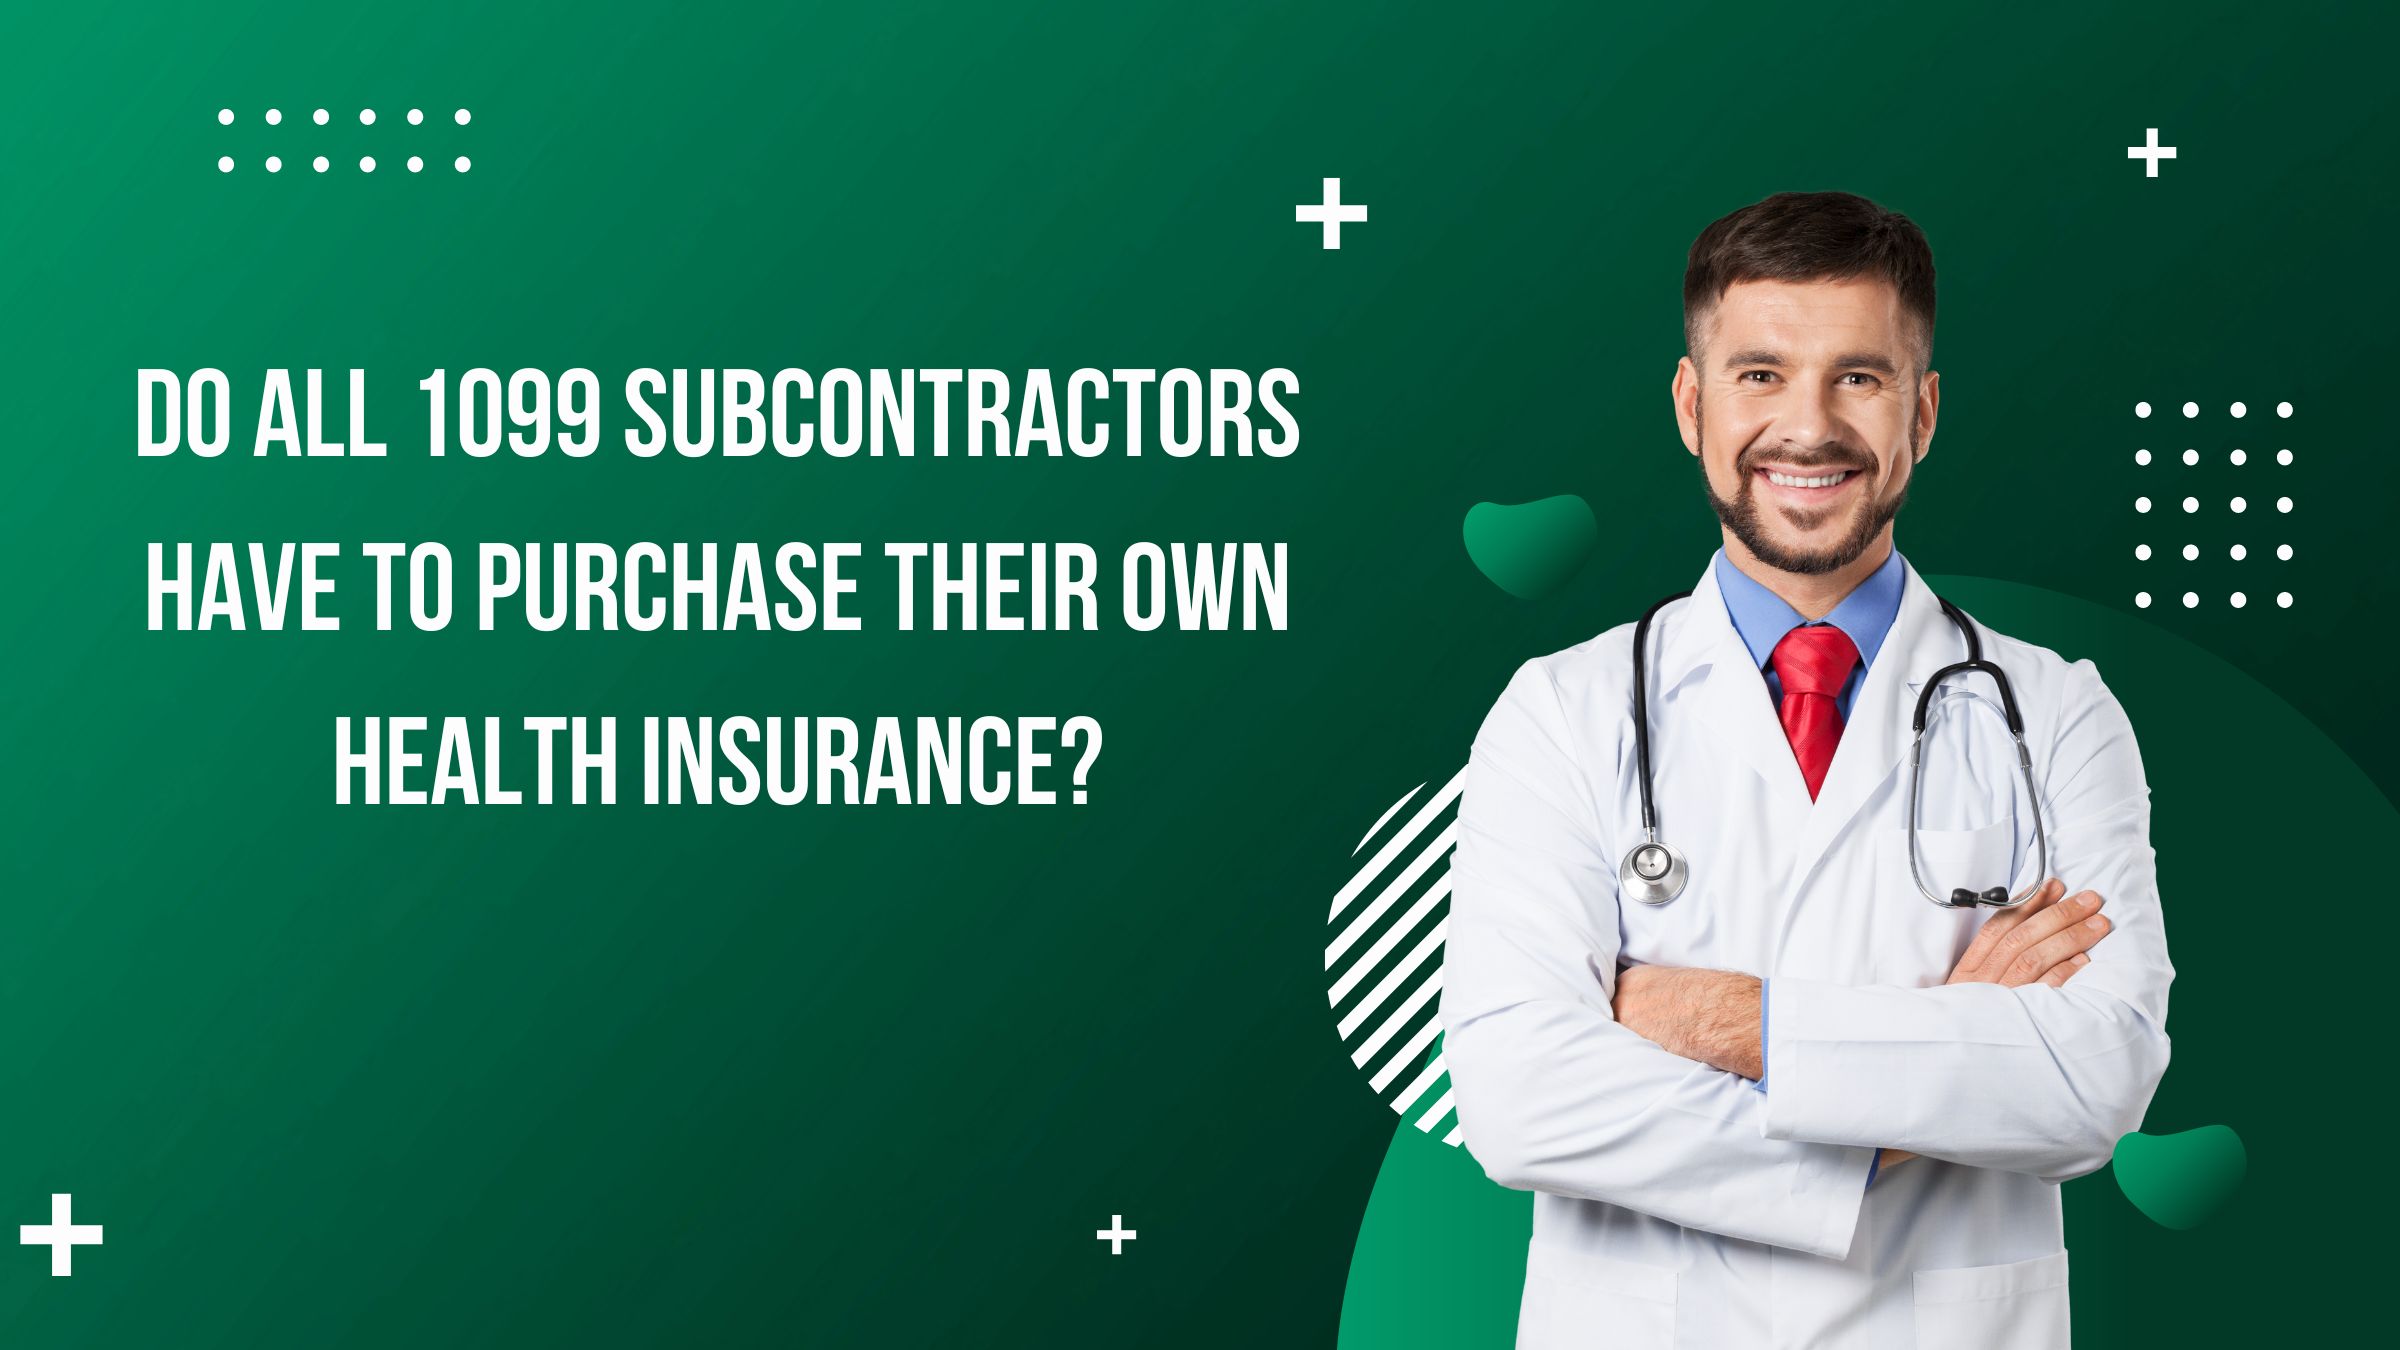 Do All 1099 Subcontractors Have To Purchase Their Own Health Insurance